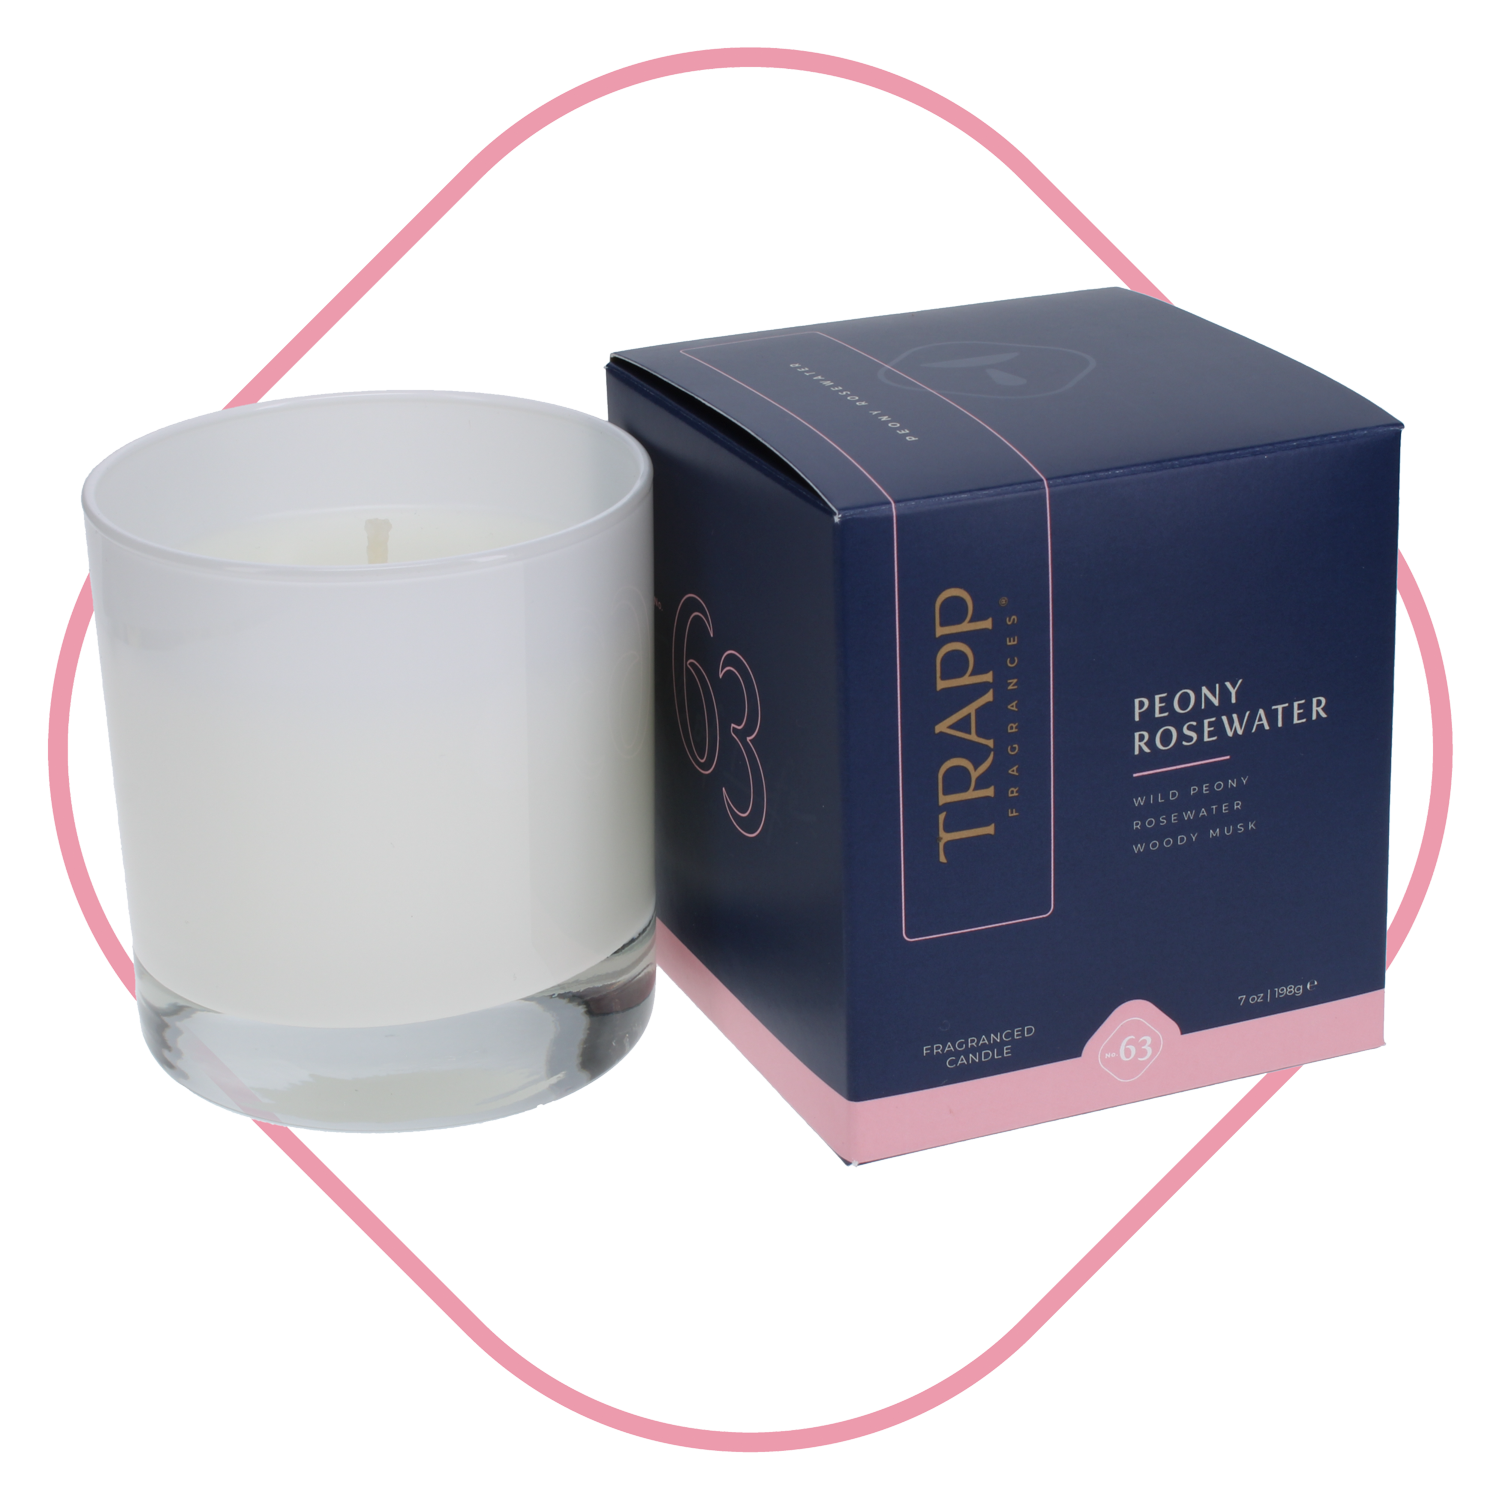 No. 63 Peony Rosewater 7 oz. Candle in Signature Box